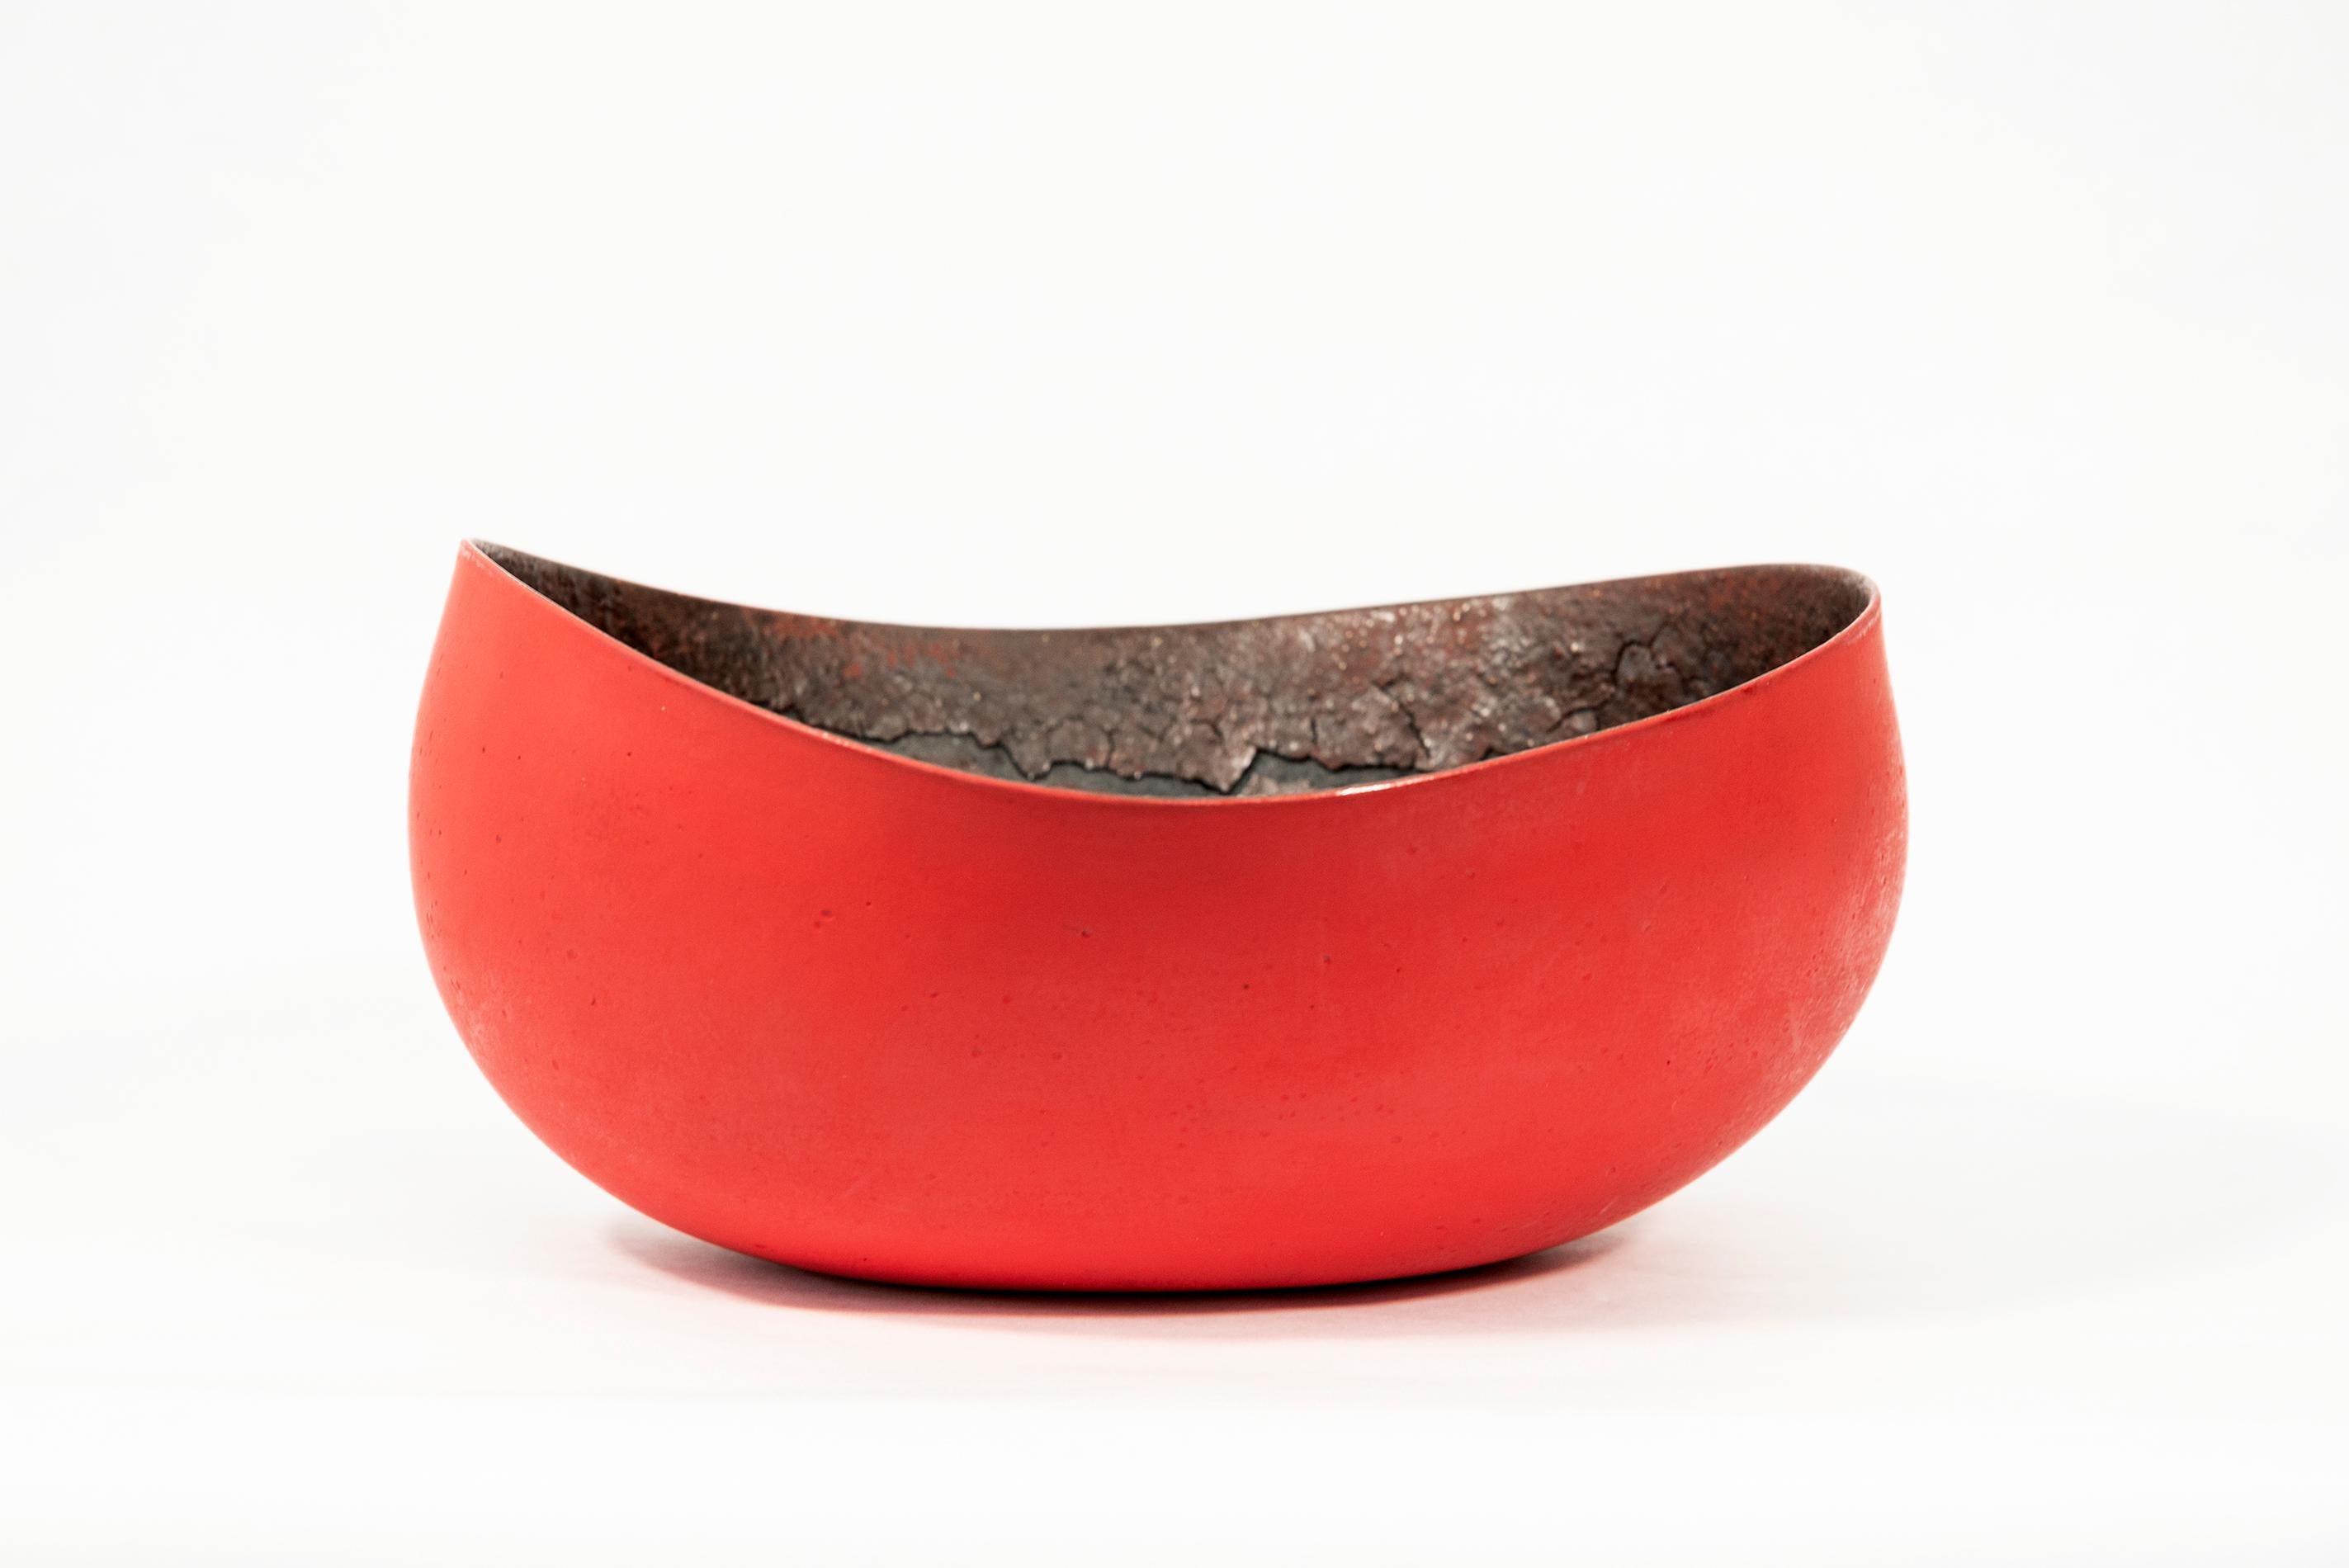 Untitled Bowl (Red)  -  red, black, nature inspired, textured, ceramic vessel For Sale 3